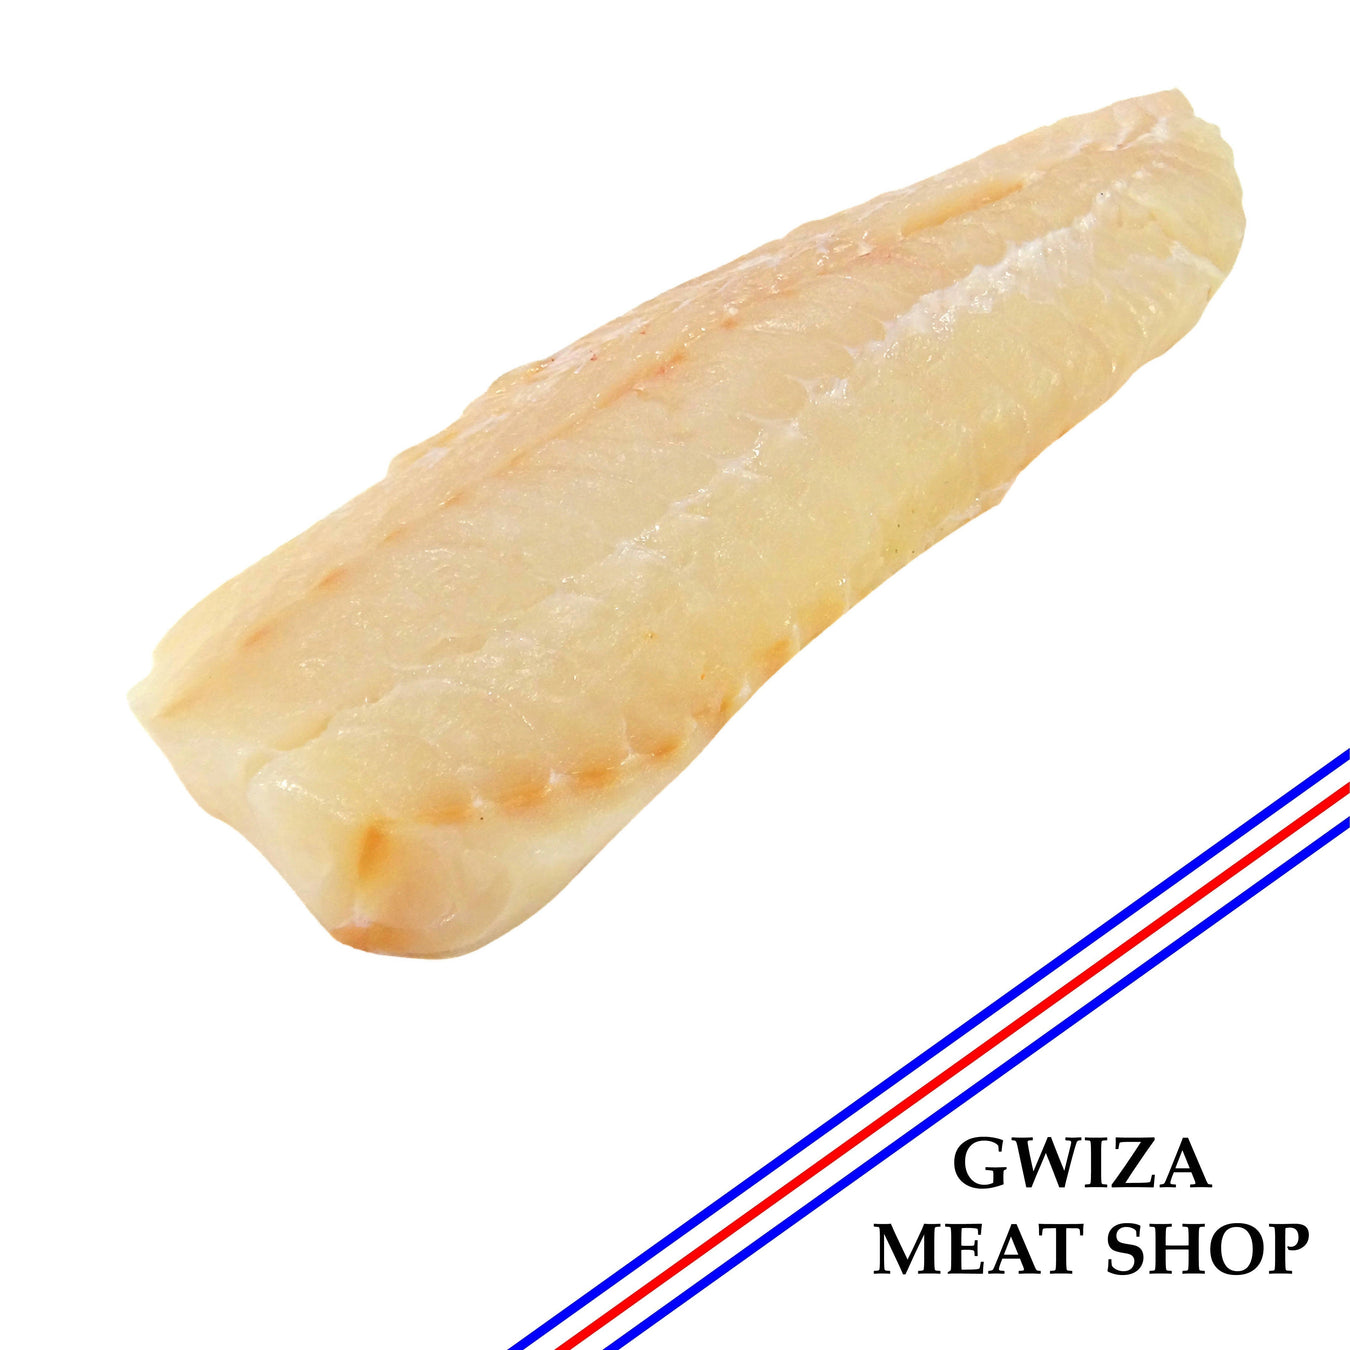 GWIZA MEAT SHOP